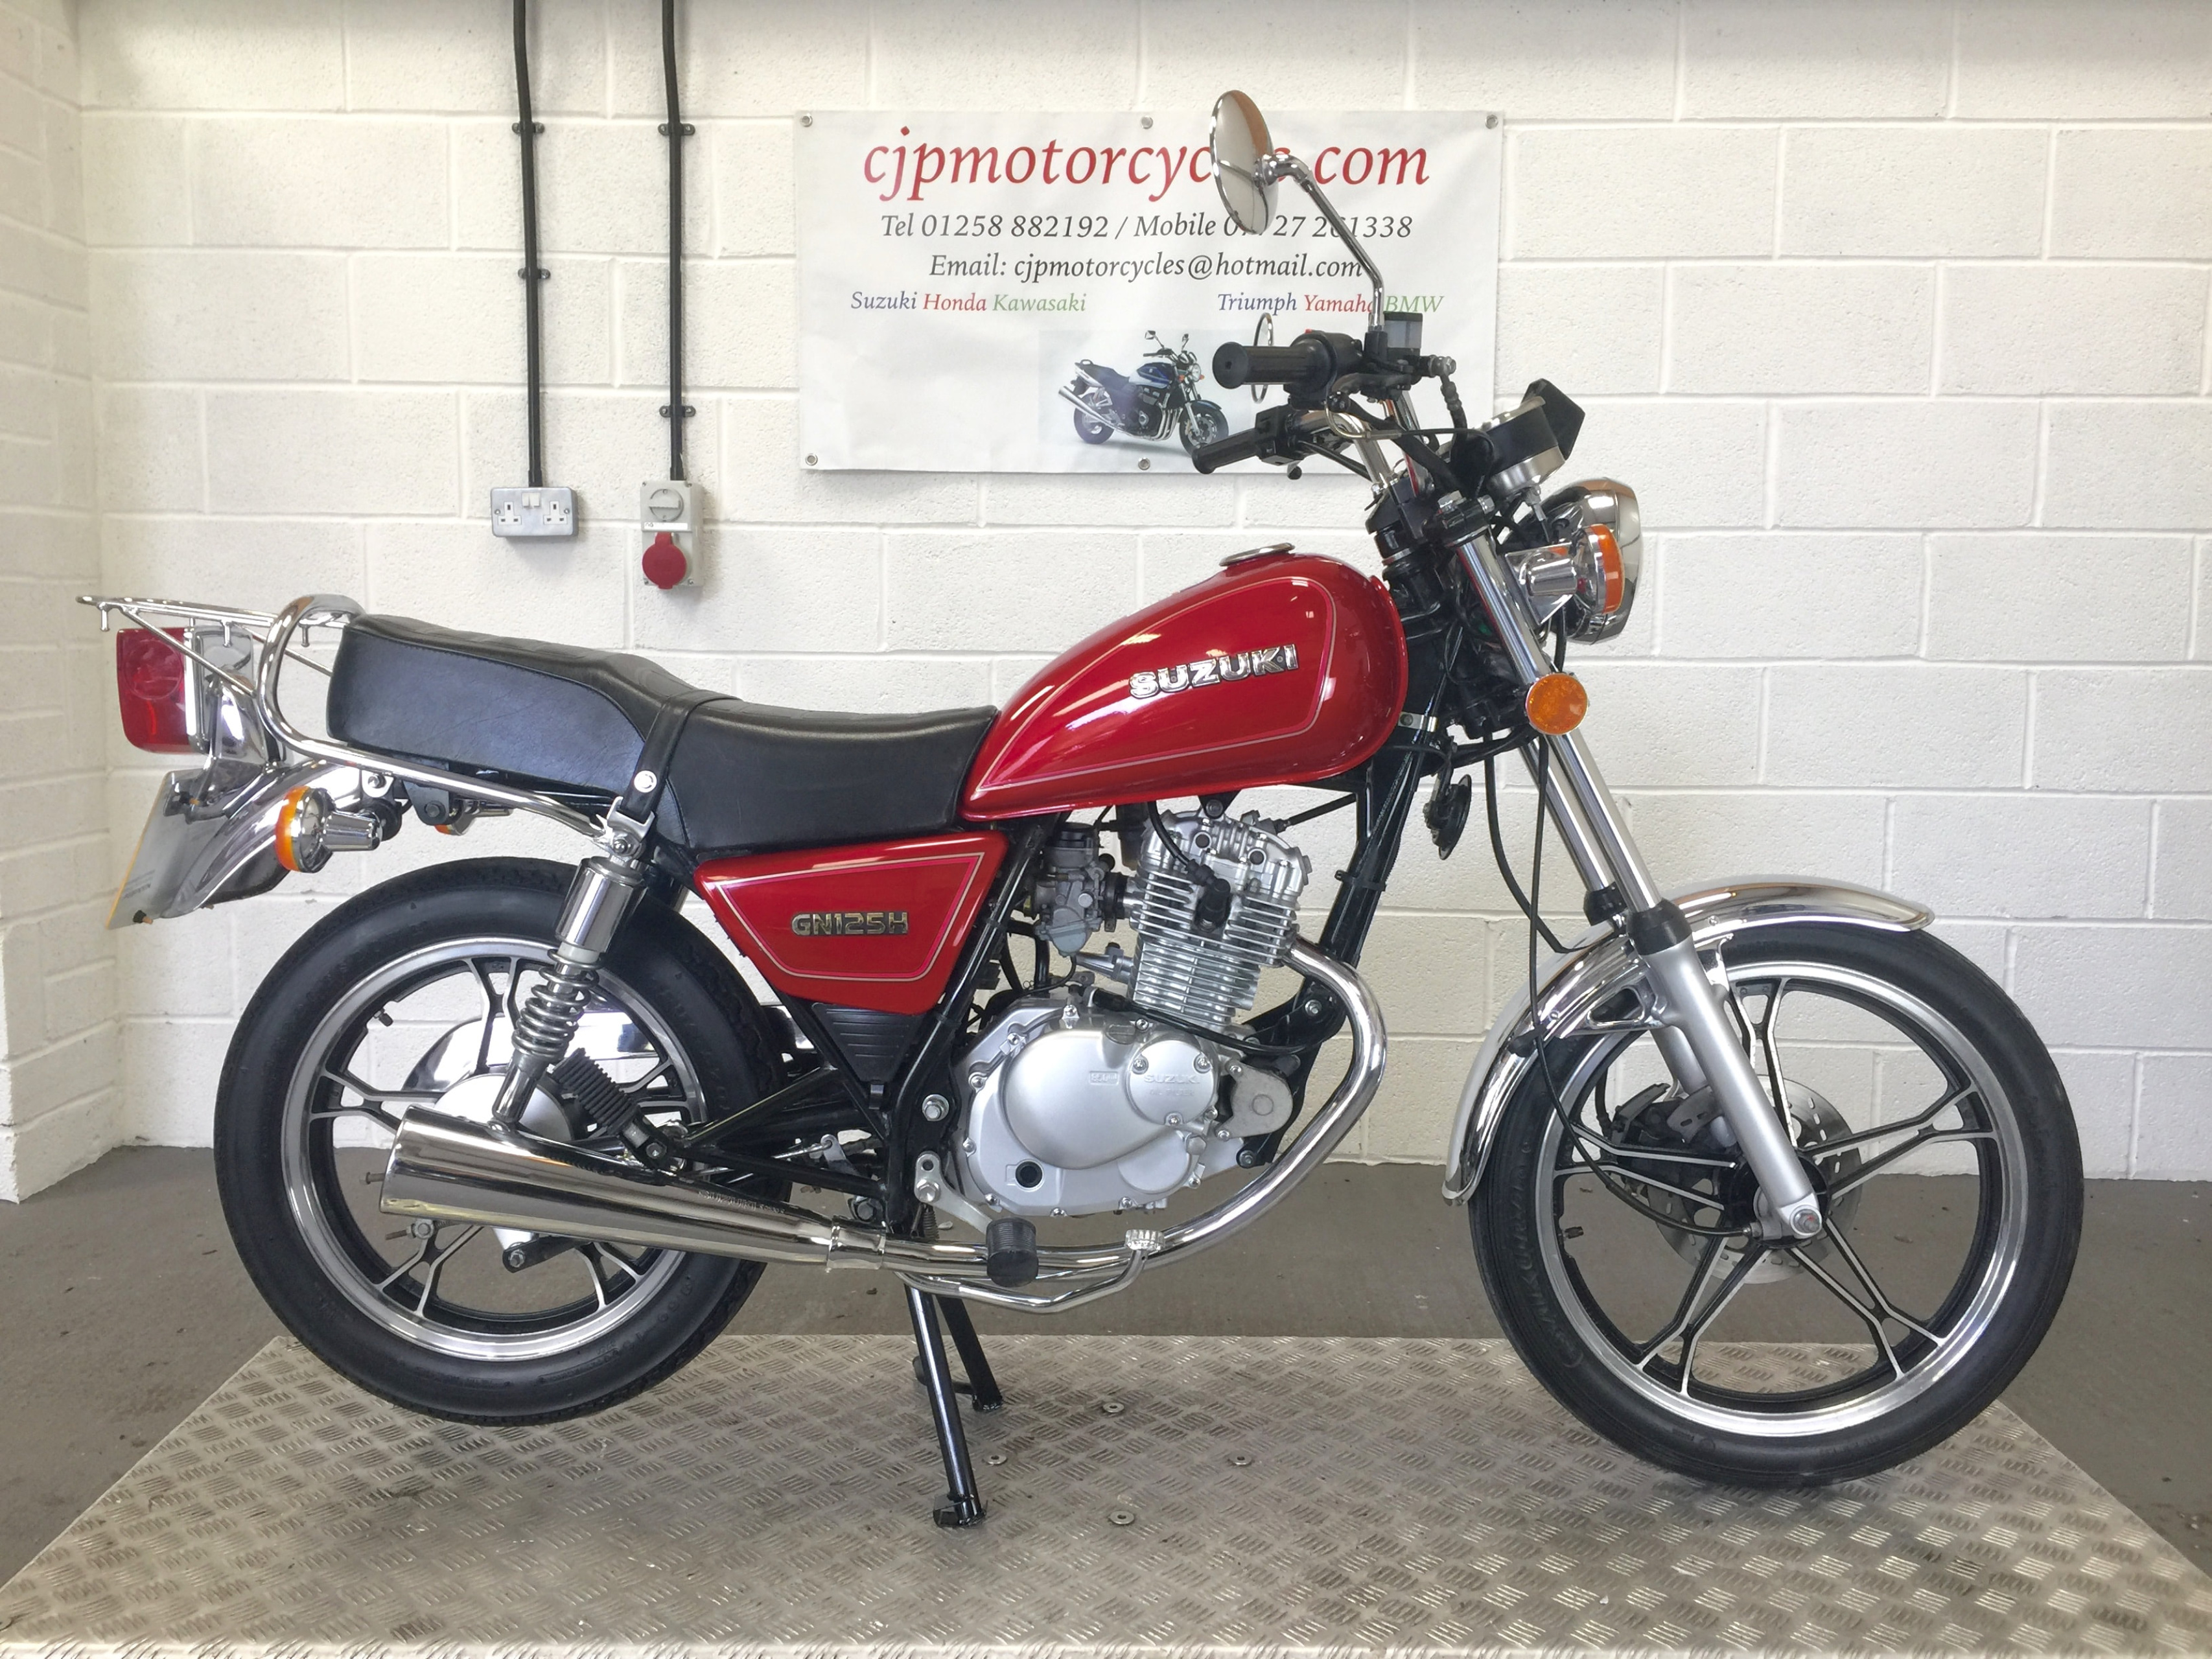 SUZUKI GN125, 2003/53, 3 OWNERS, 8811 MILES, SOLD TO RICHARD IN EXETER